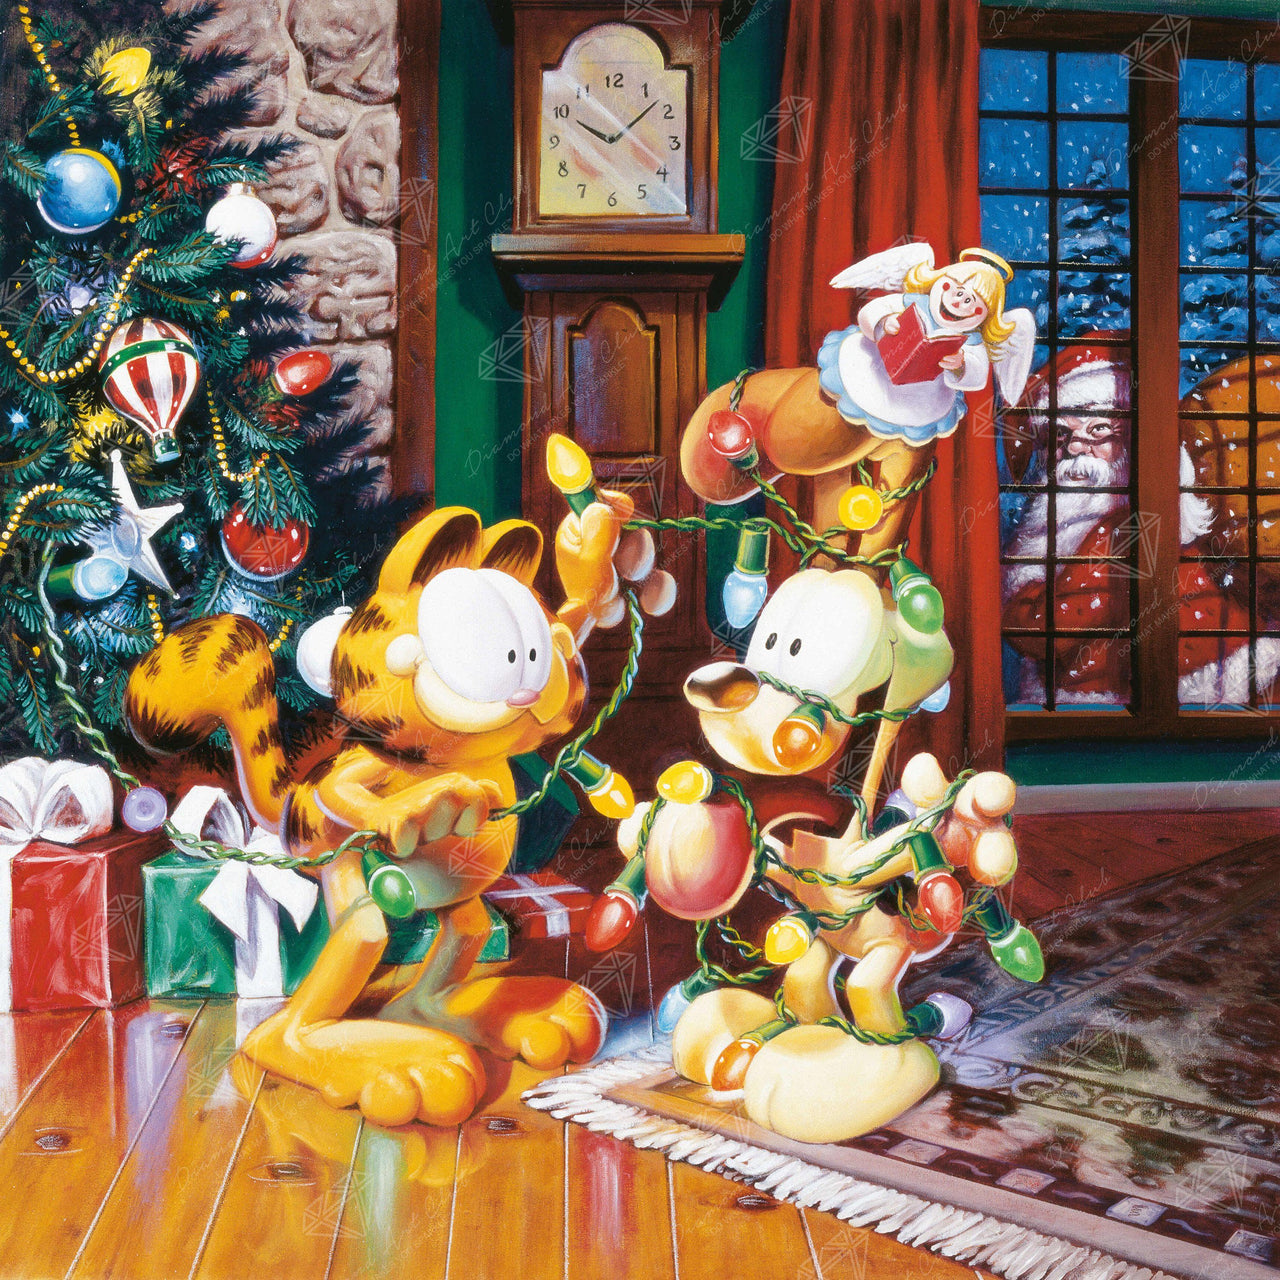 Diamond Painting A Garfield Christmas 27.6" x 27.6″ (70cm x 70cm) / Round with 59 Colors including 4 ABs / 76,729